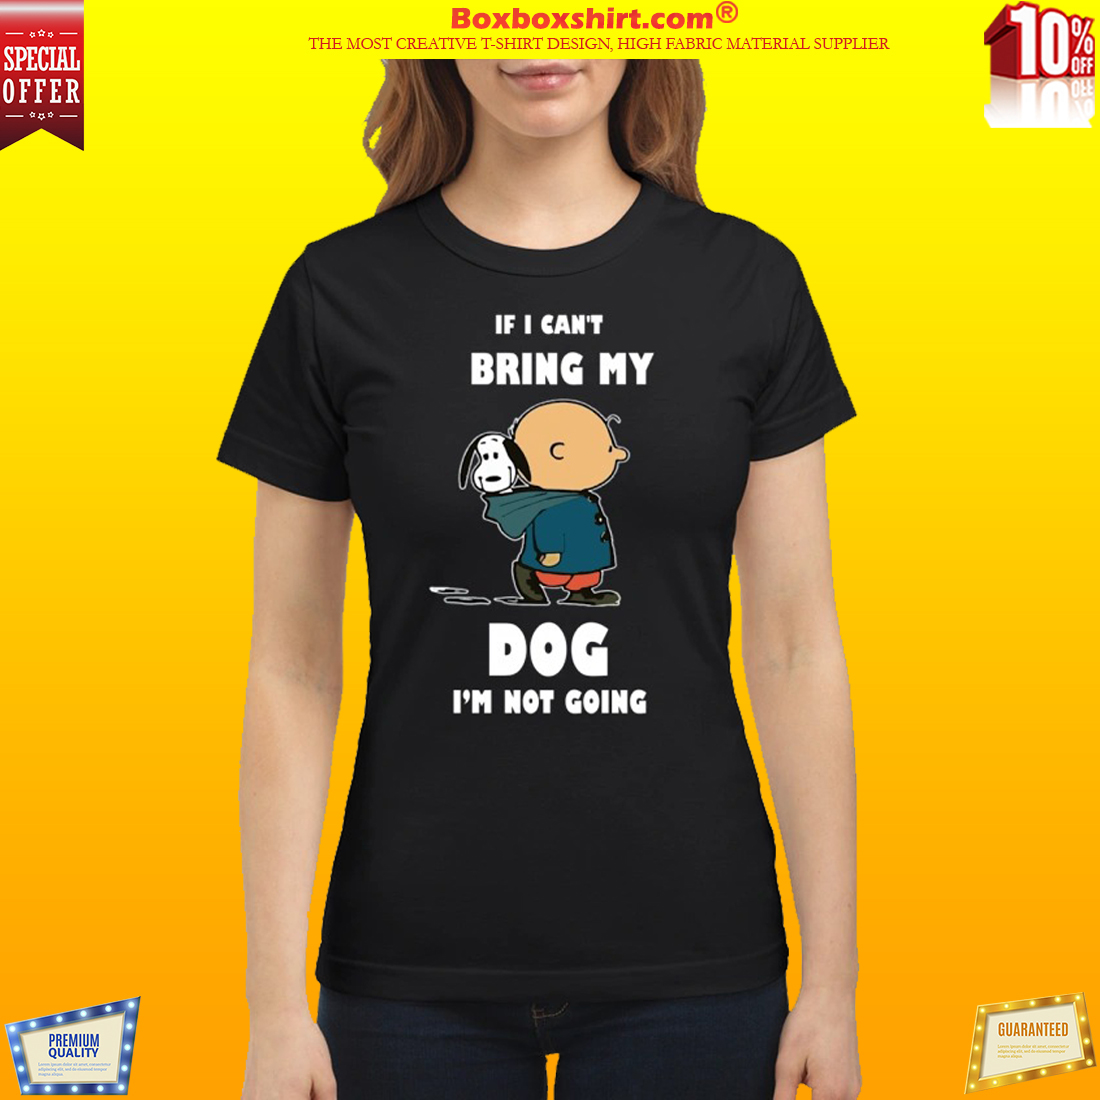 If I can't bring my dog I'm not going classic shirt